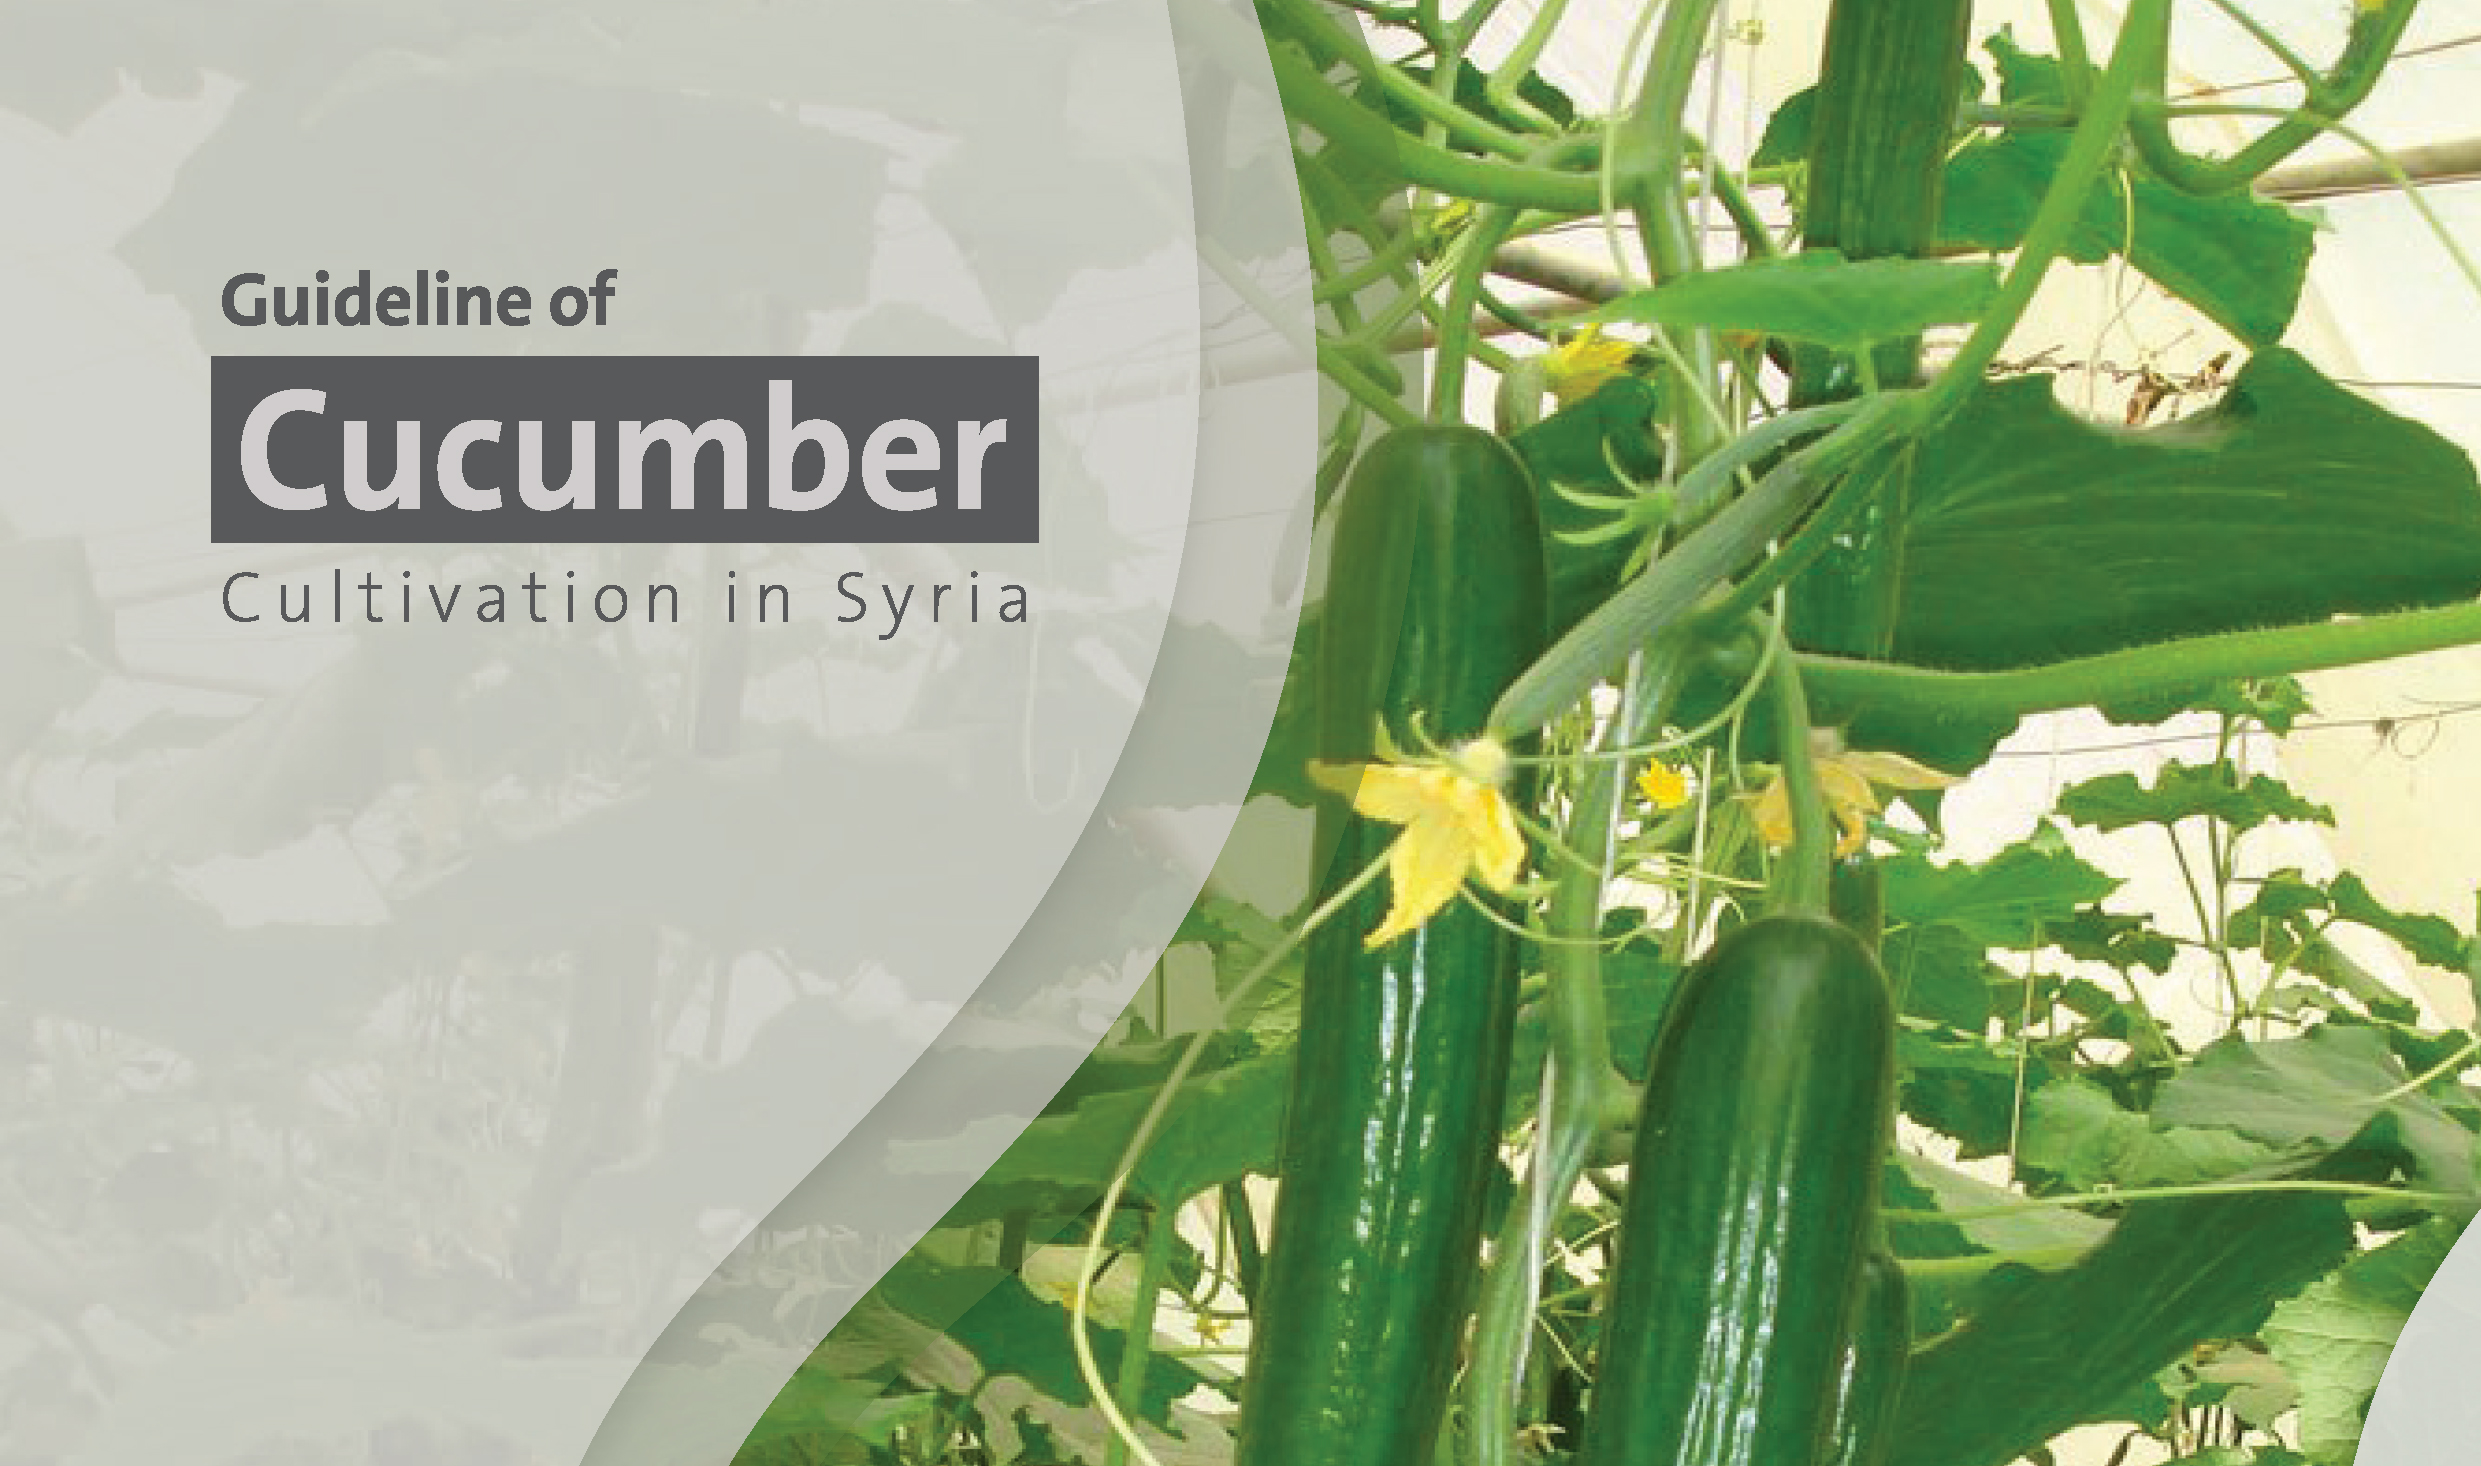 Agricultural Guideline Manuals Project “Cucumber planting”